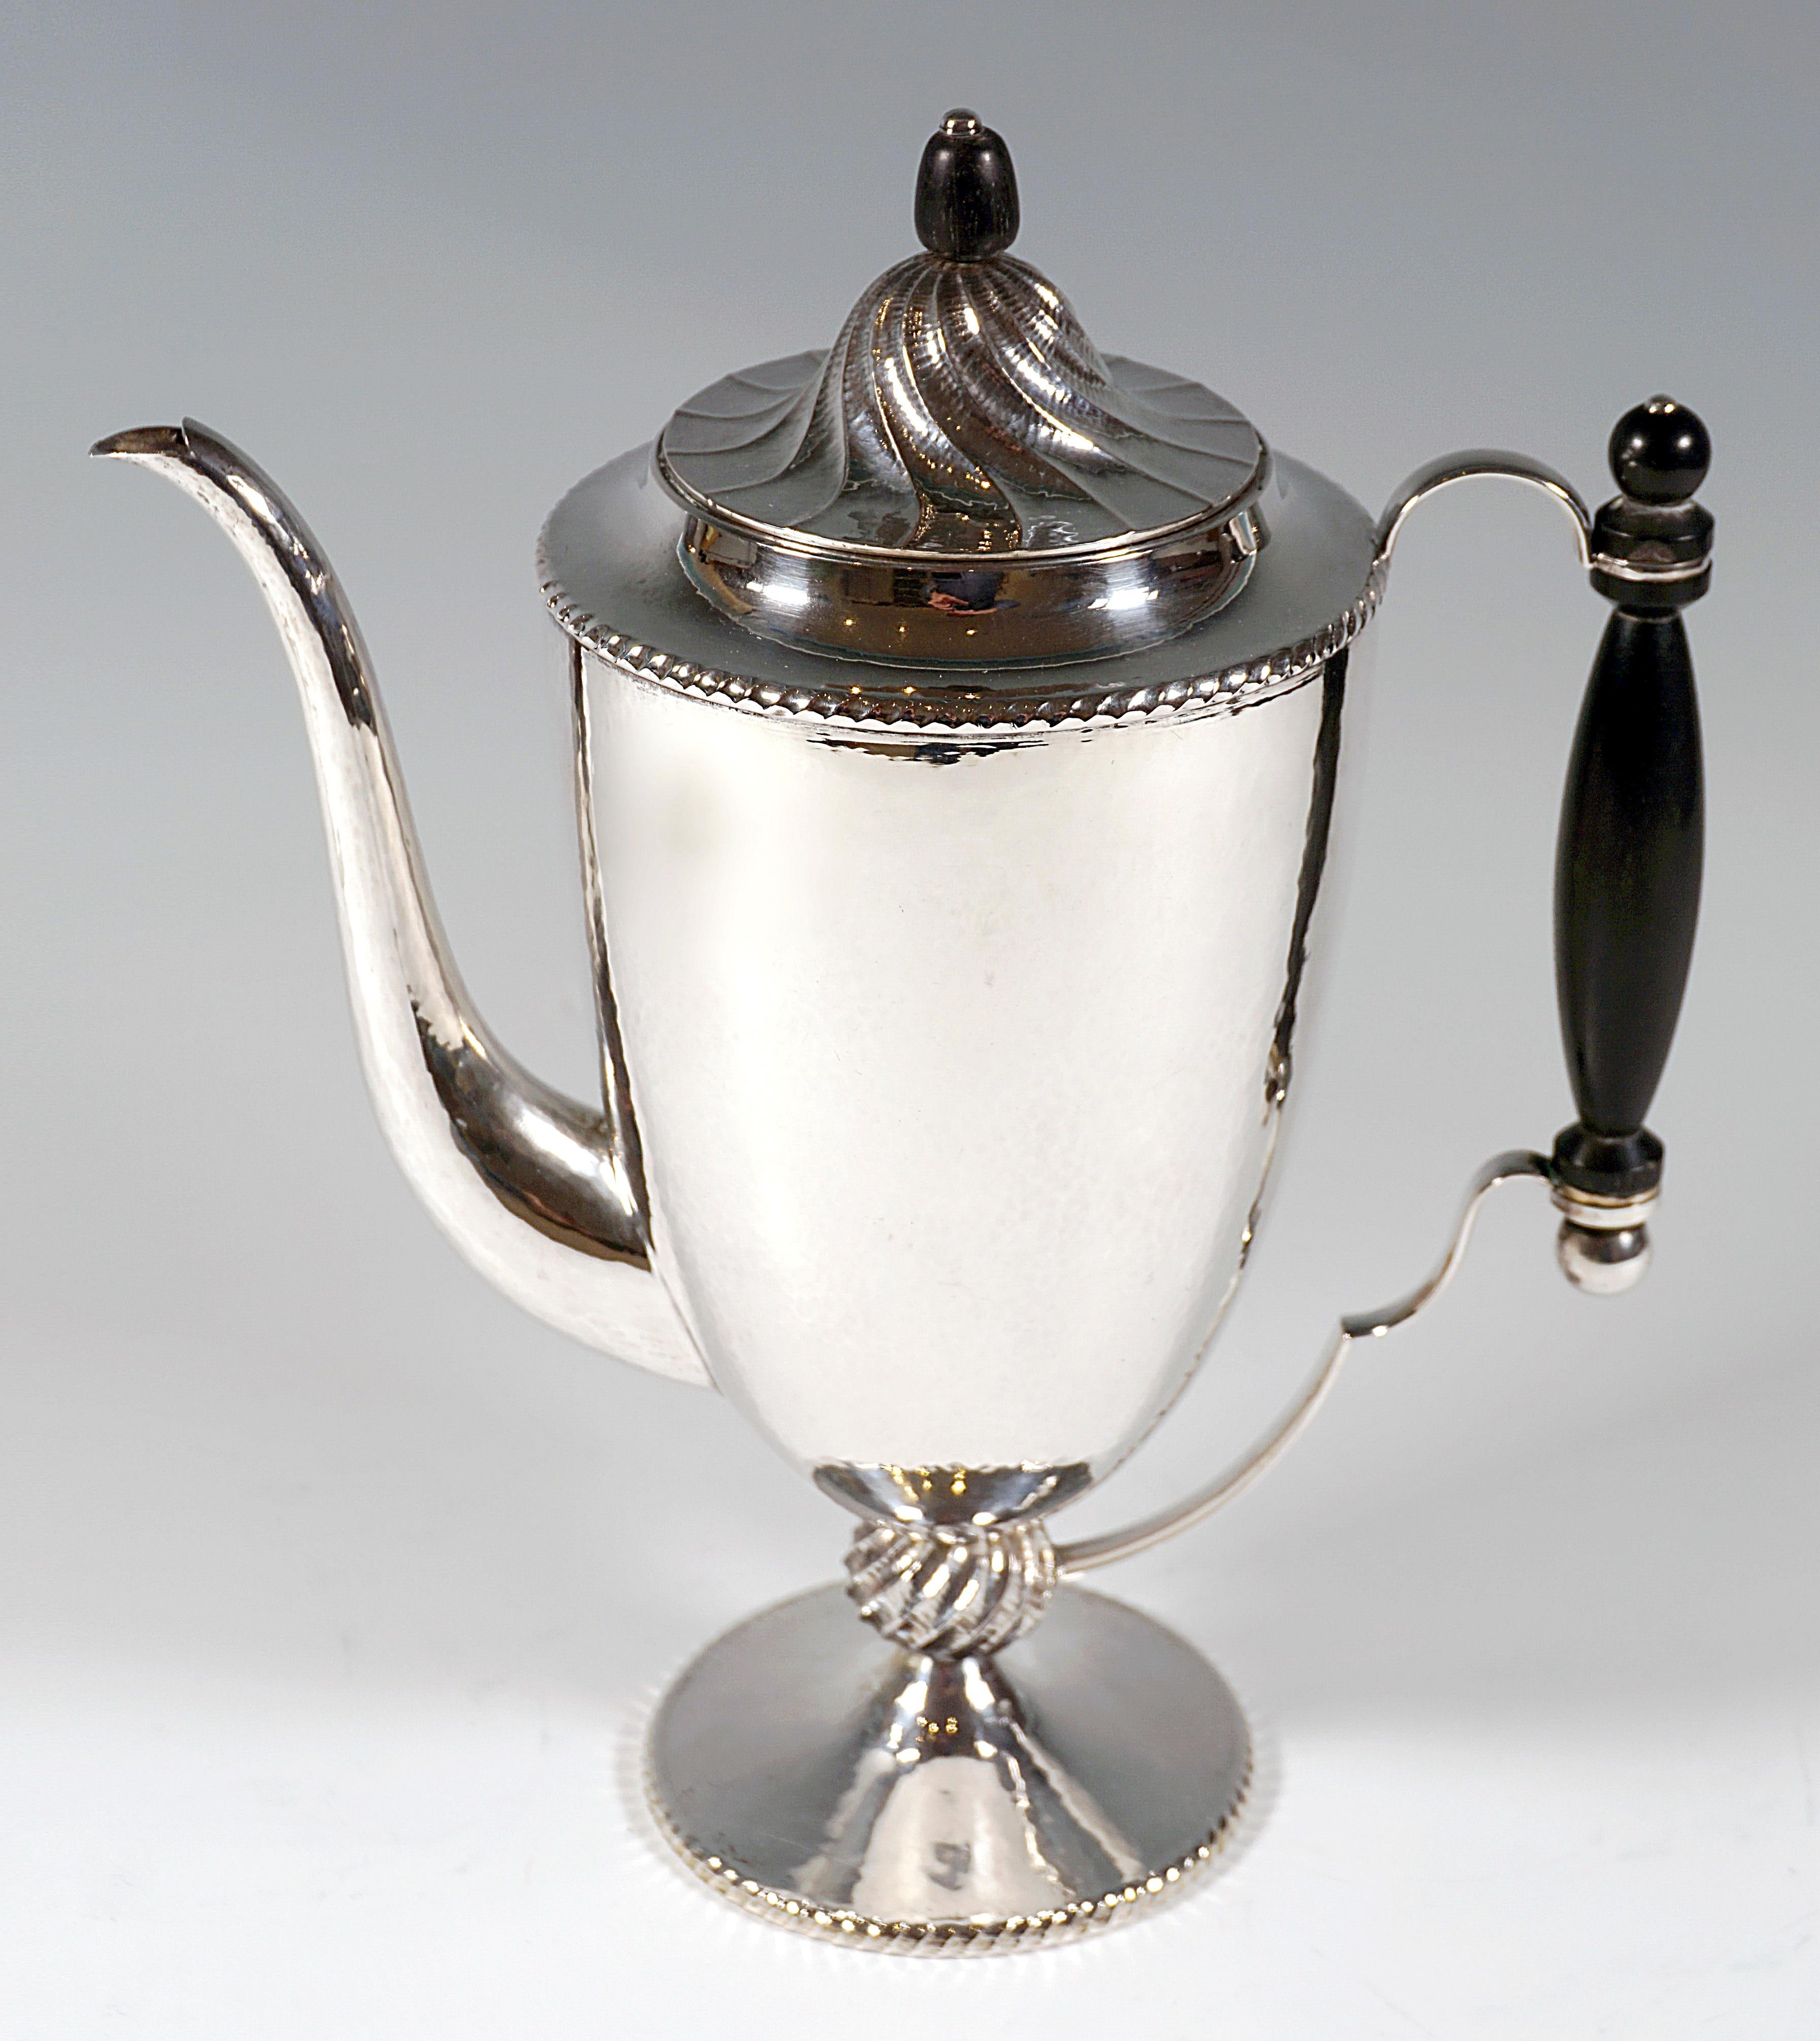 Excellent, elegant silver coffee pot in the style of Dagobert Peche's designs:
Raised, widening vessel on a stepped, funnel-shaped base, connected by a beaded ring with hammered, spirally chased grooves, cord band border on the foot rim, as well as